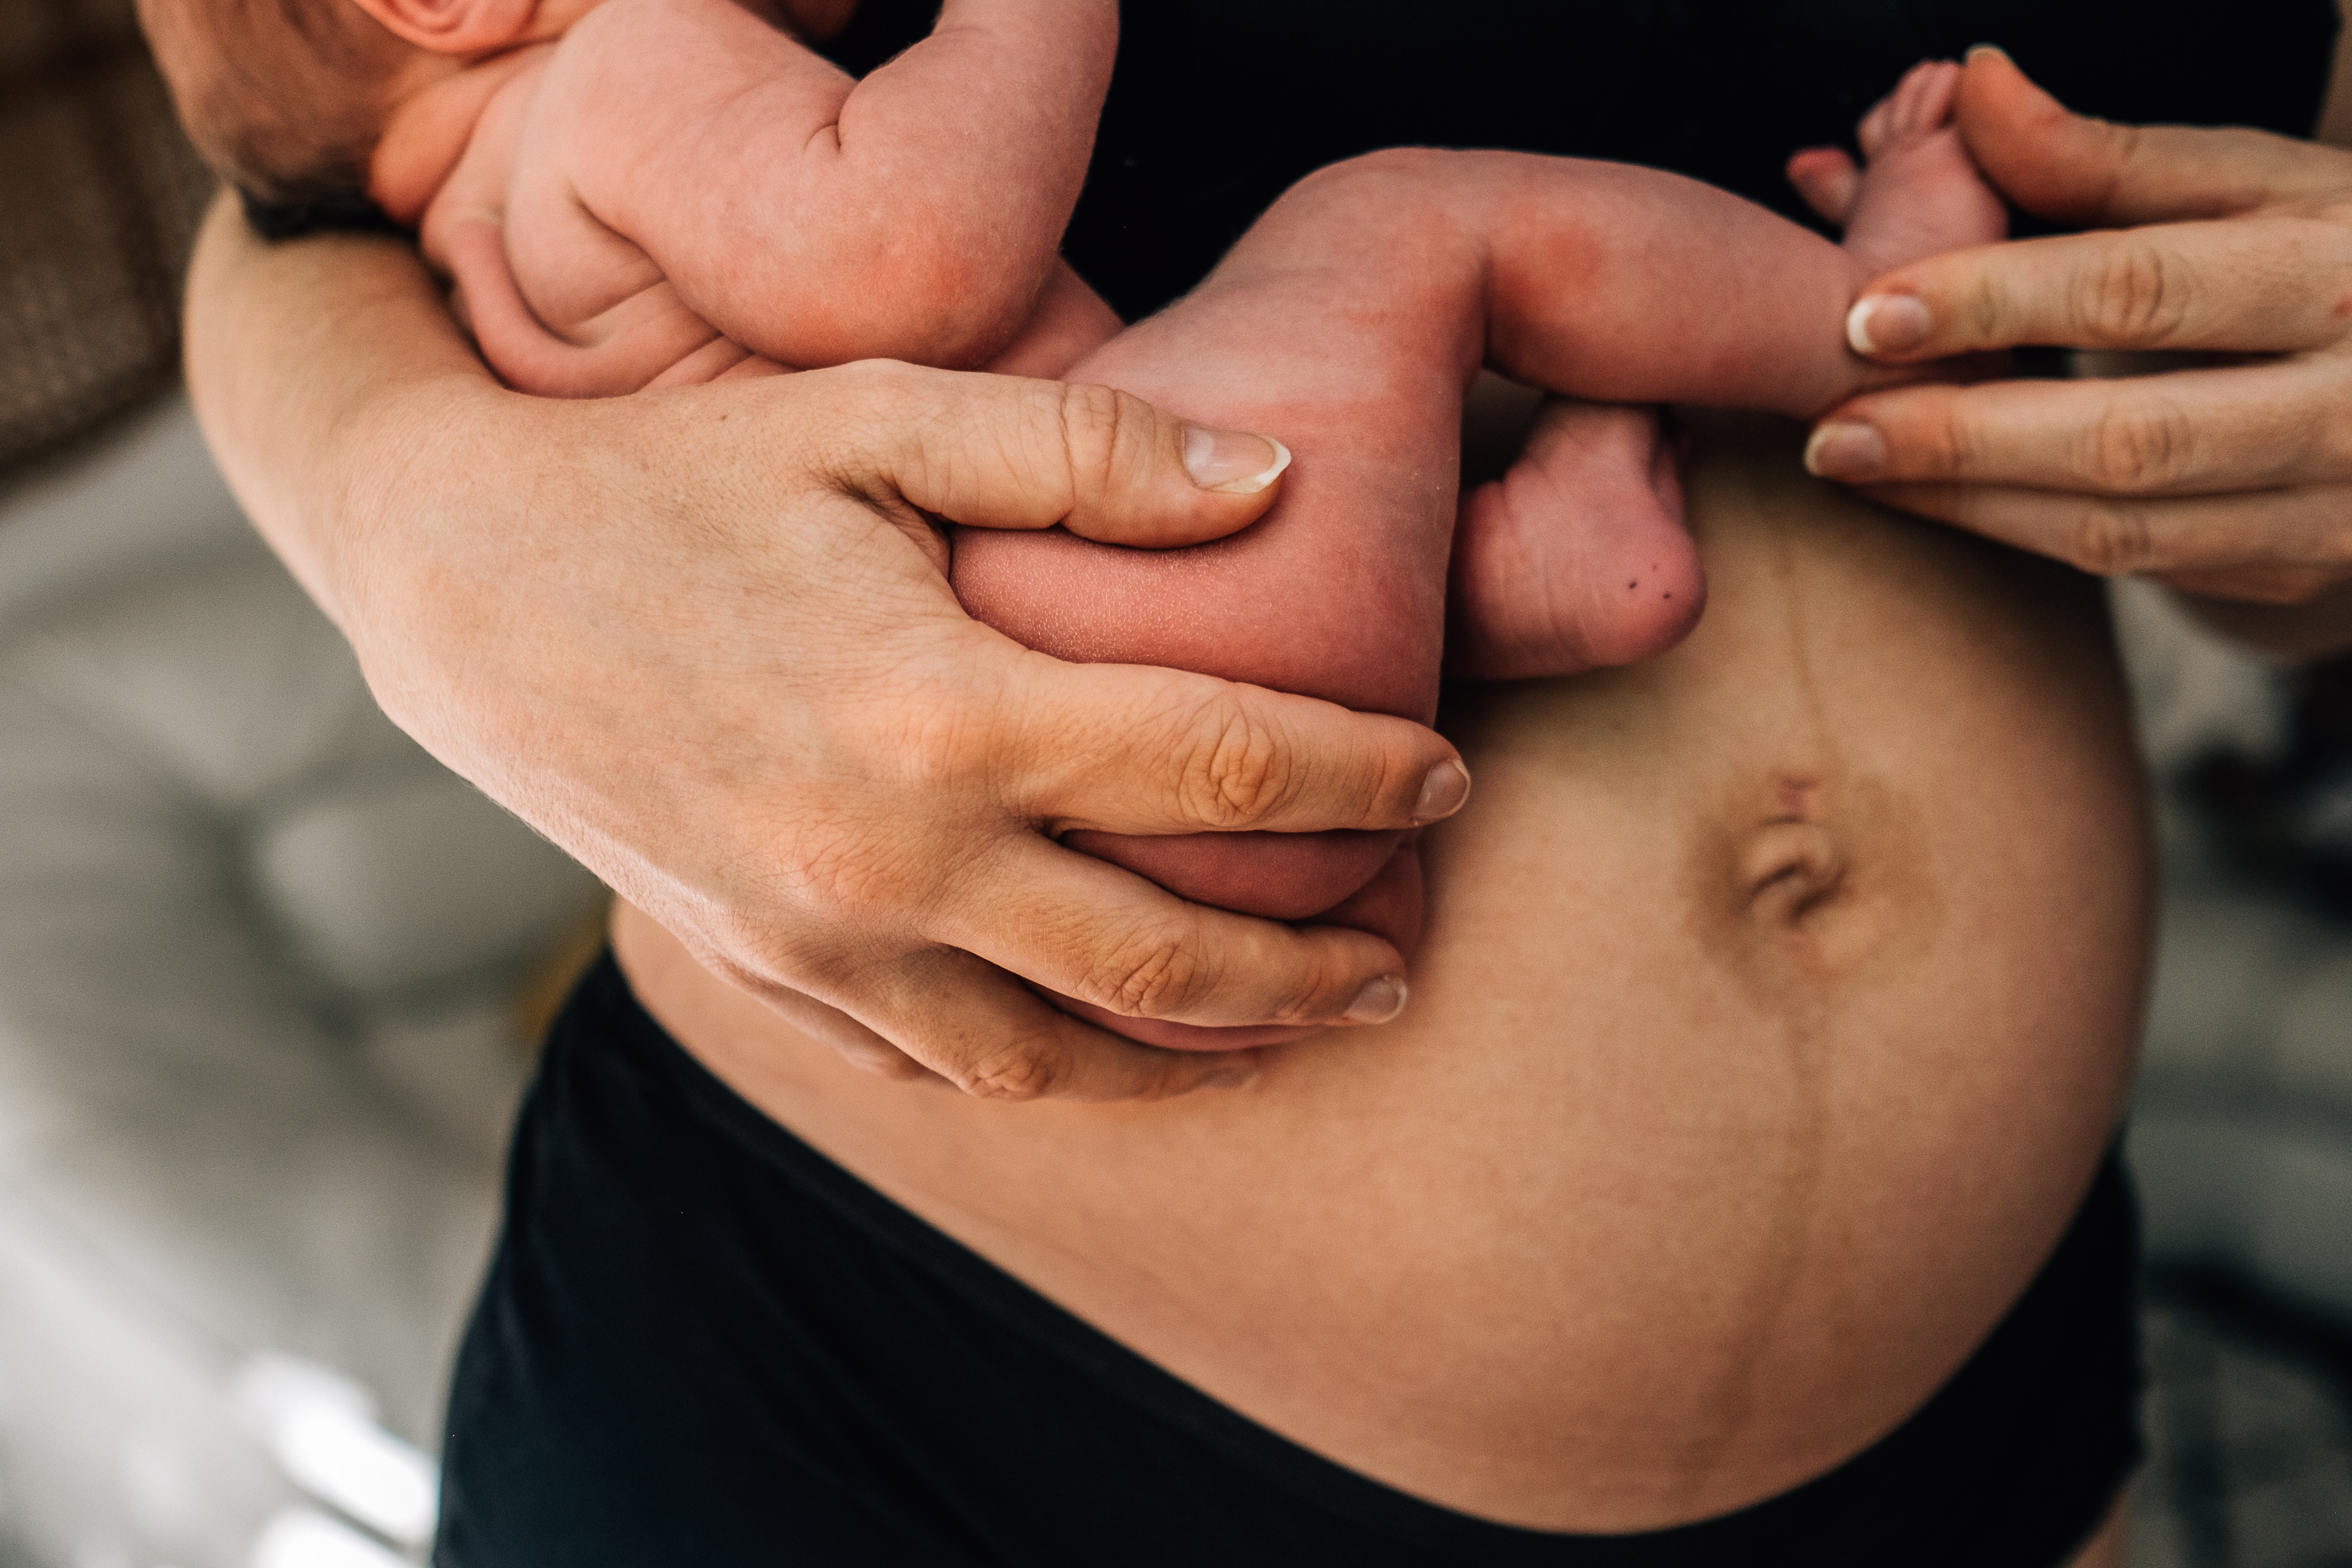 A picture of a post-partum stomach and the mother is holding her baby against her stomach